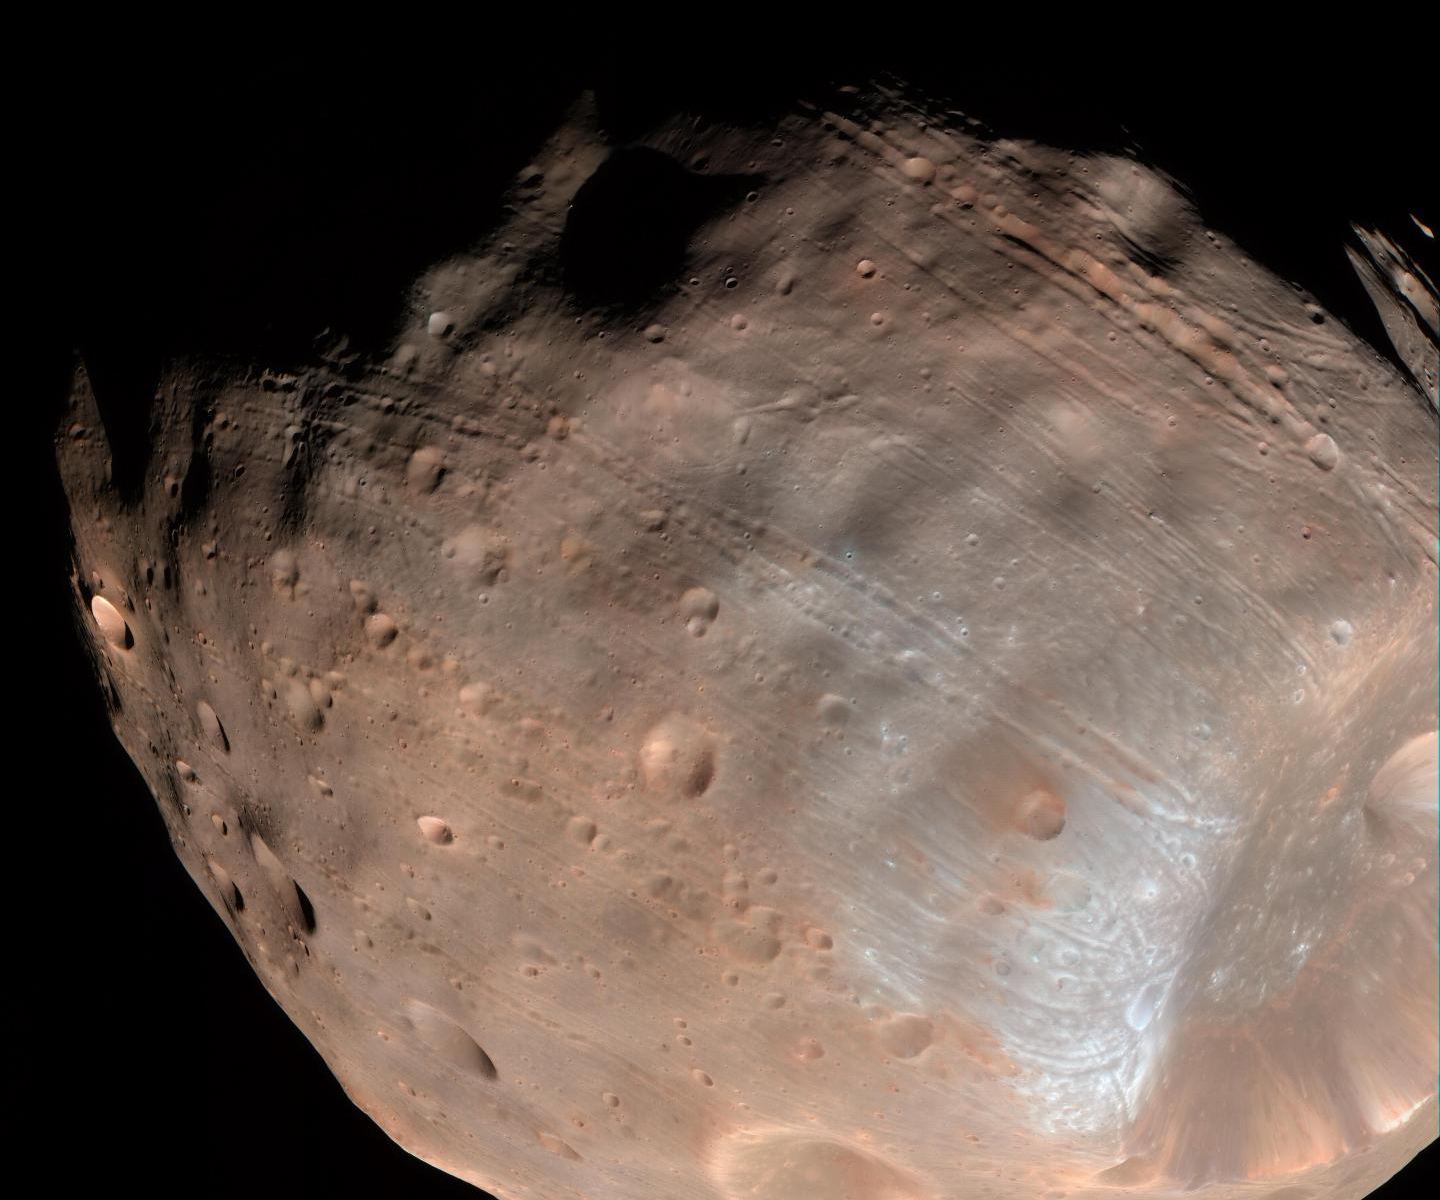 Much of Phobos' surface is covered with strange linear grooves. New research bolsters the idea that boulders blasted free from Stickney crater (the large depression on the right) carved those iconic grooves. Image Credit: NASA/JPL-Caltech/University of Arizona